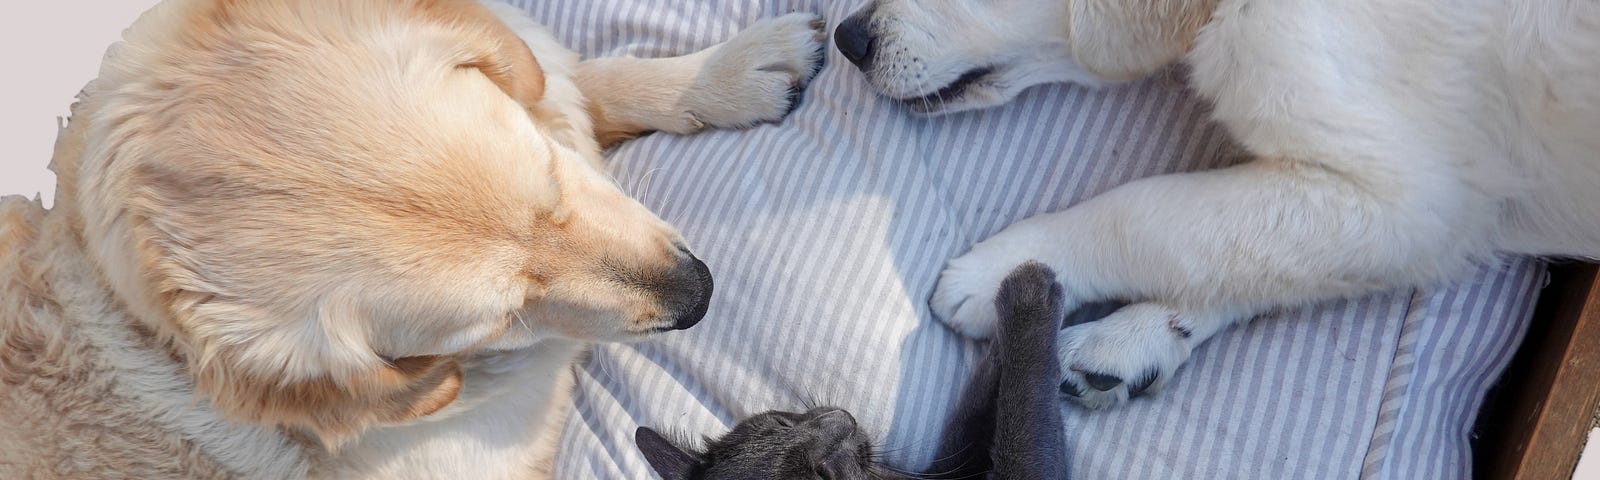 Photo of two dogs comforting a cat.